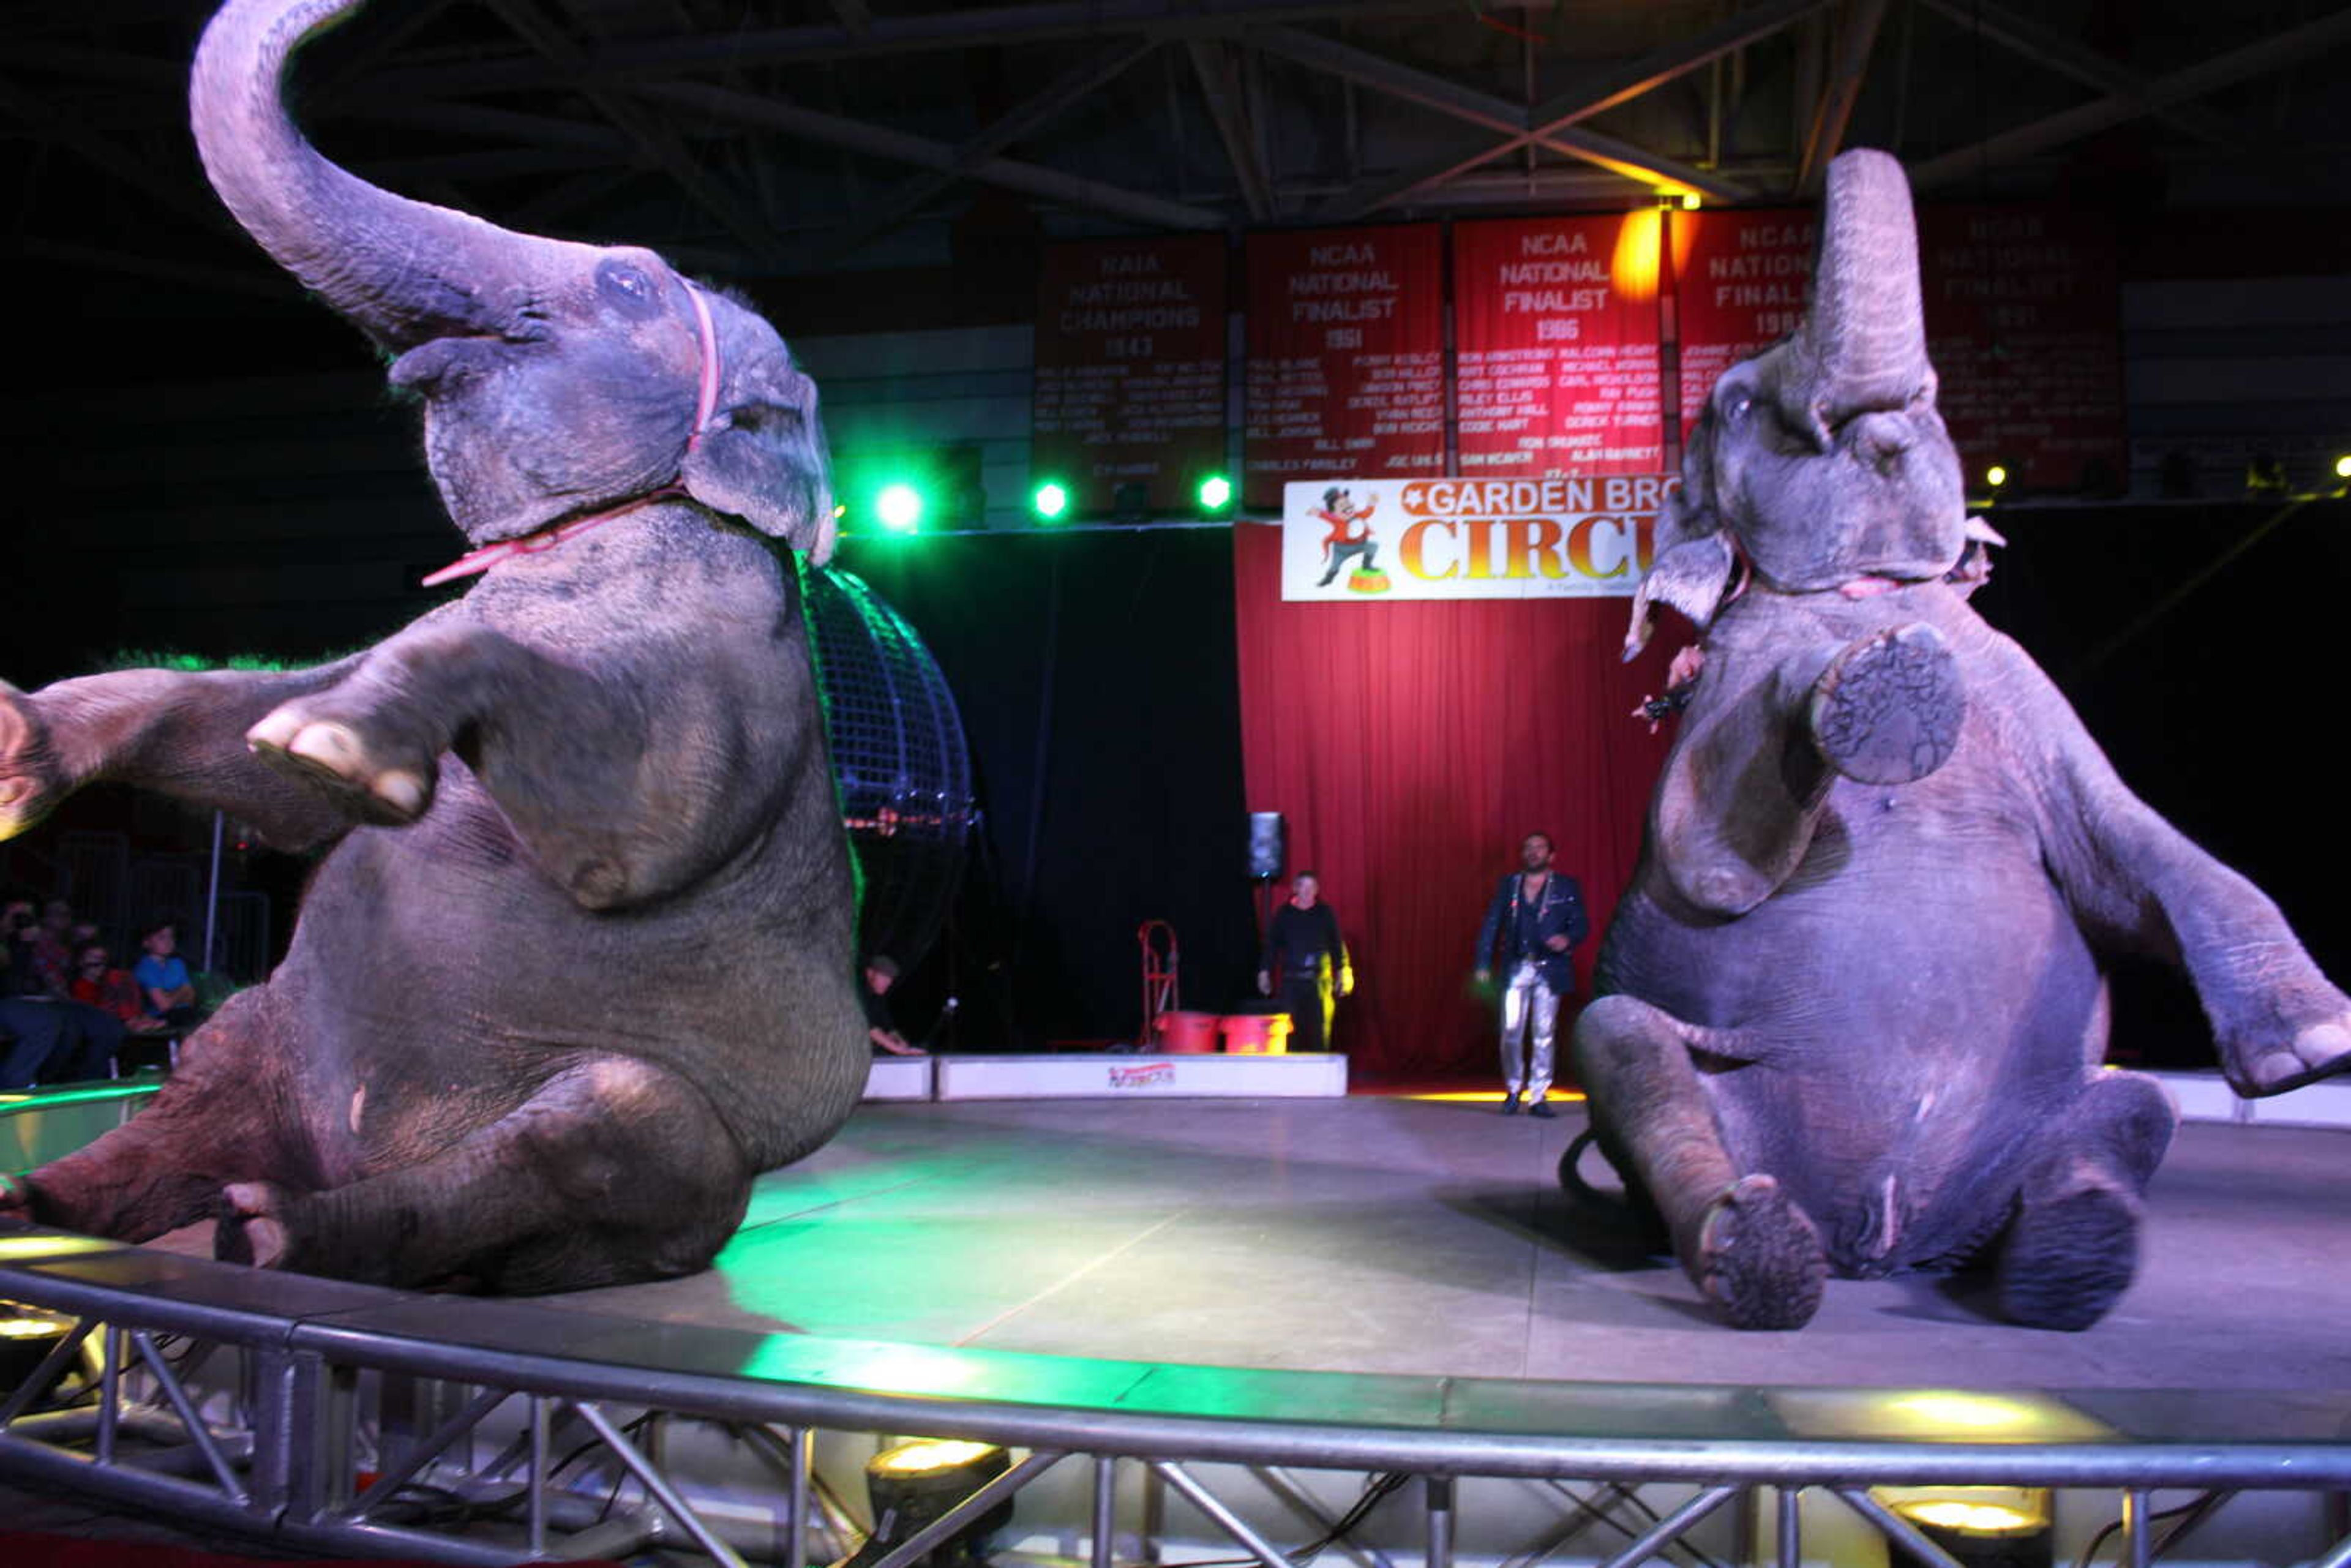 Two elephants perform at the Garden Bros Circus.